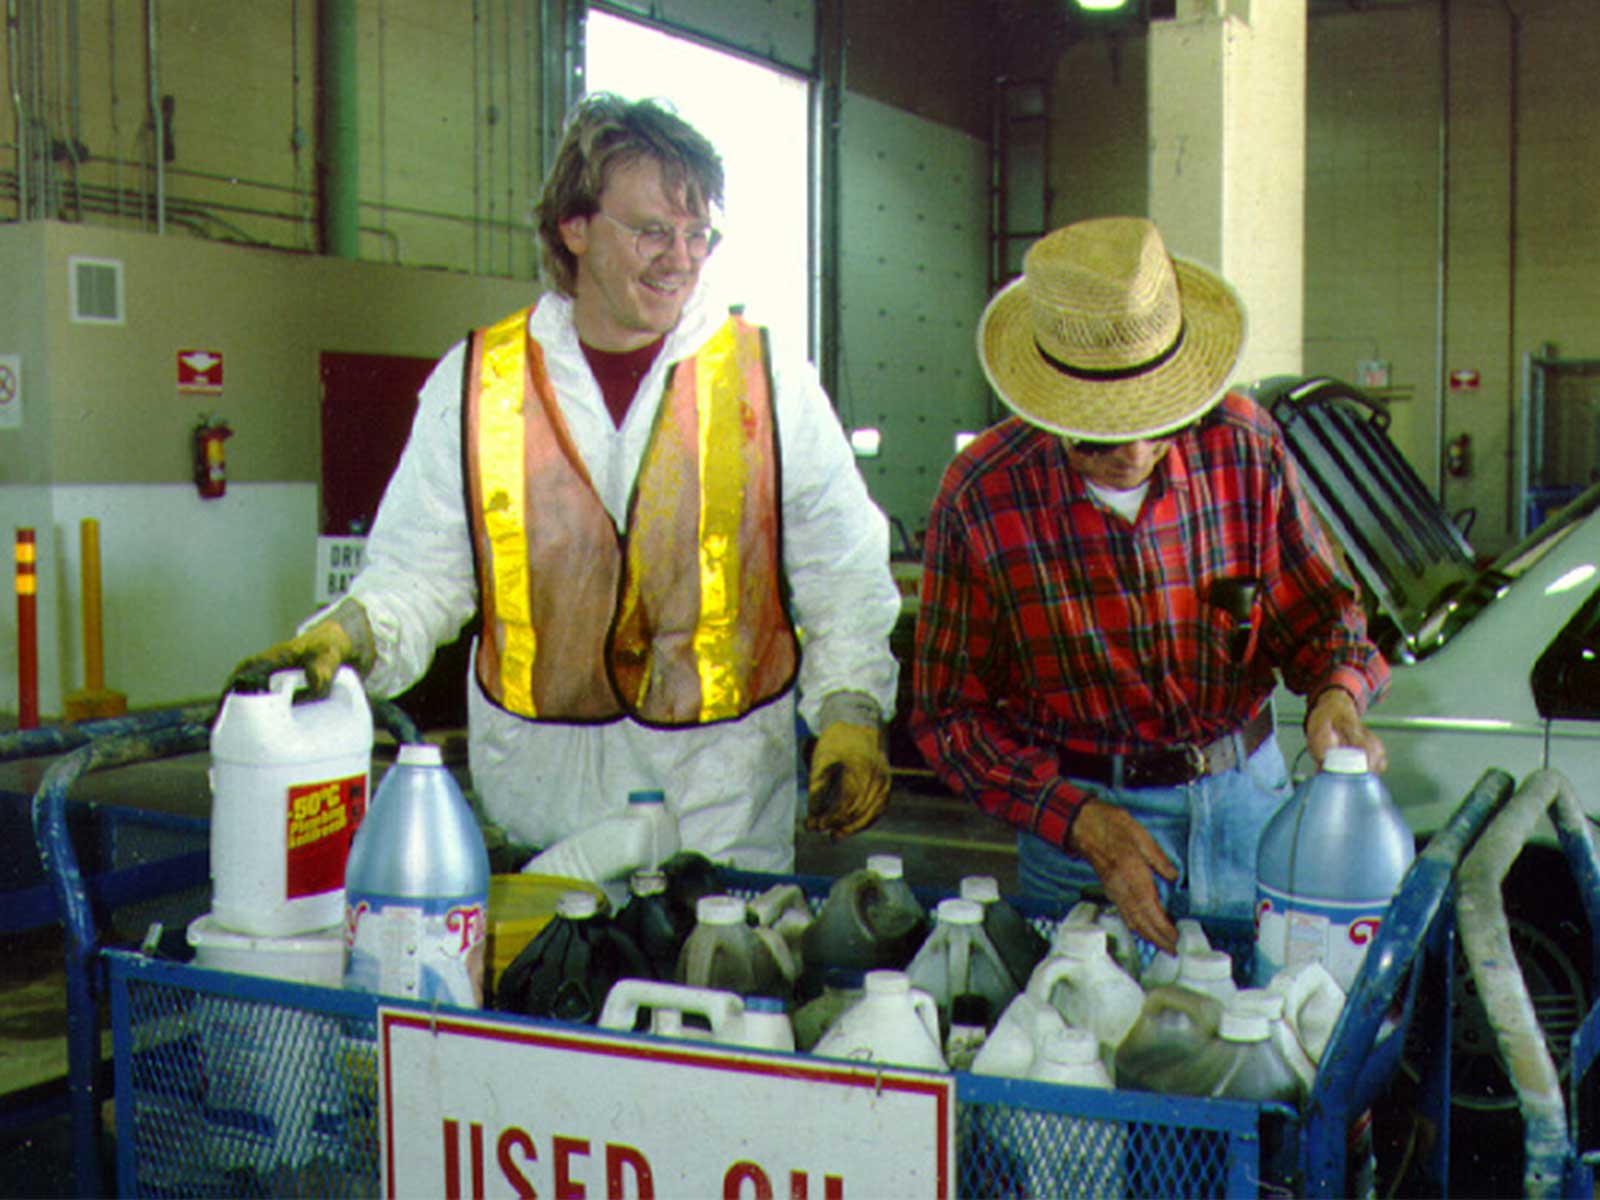 1999 - Second Eco Station for Household Hazardous Waste Opens